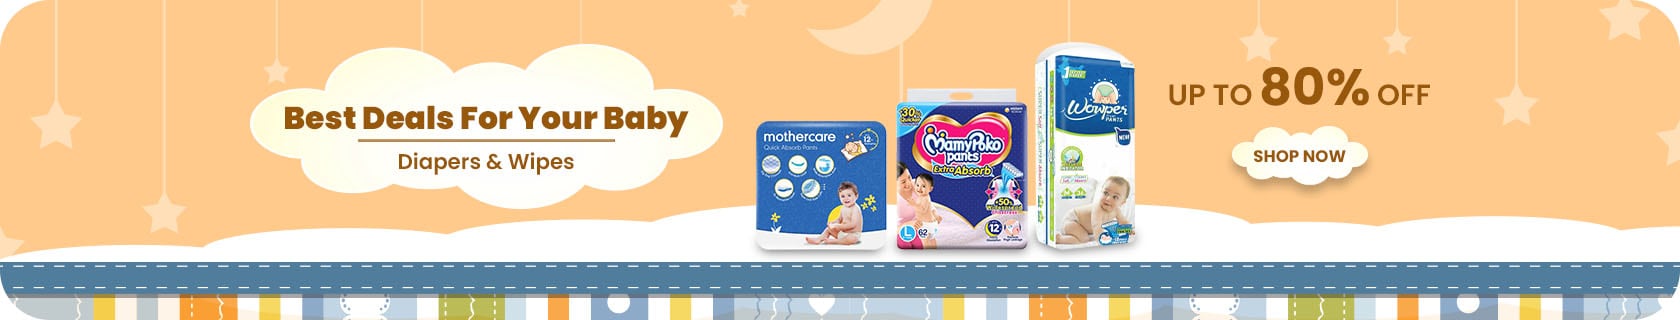 Home_nfc_diapers3pone_web